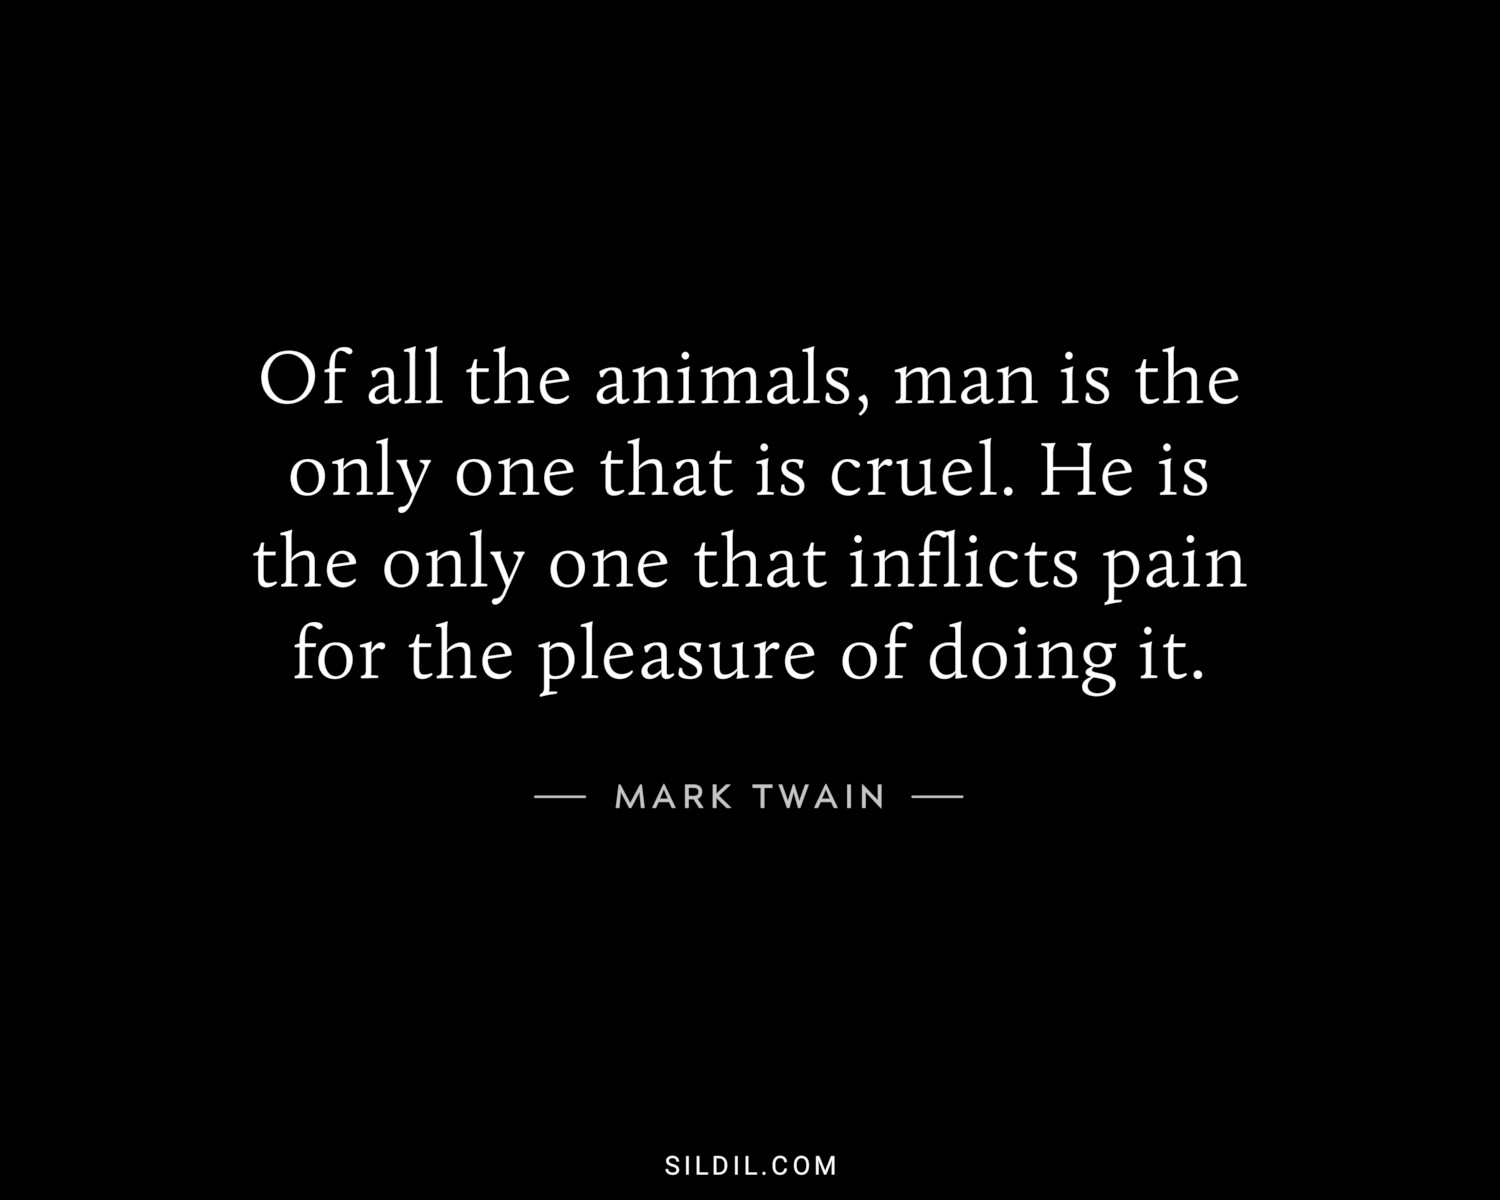 Of all the animals, man is the only one that is cruel. He is the only one that inflicts pain for the pleasure of doing it.